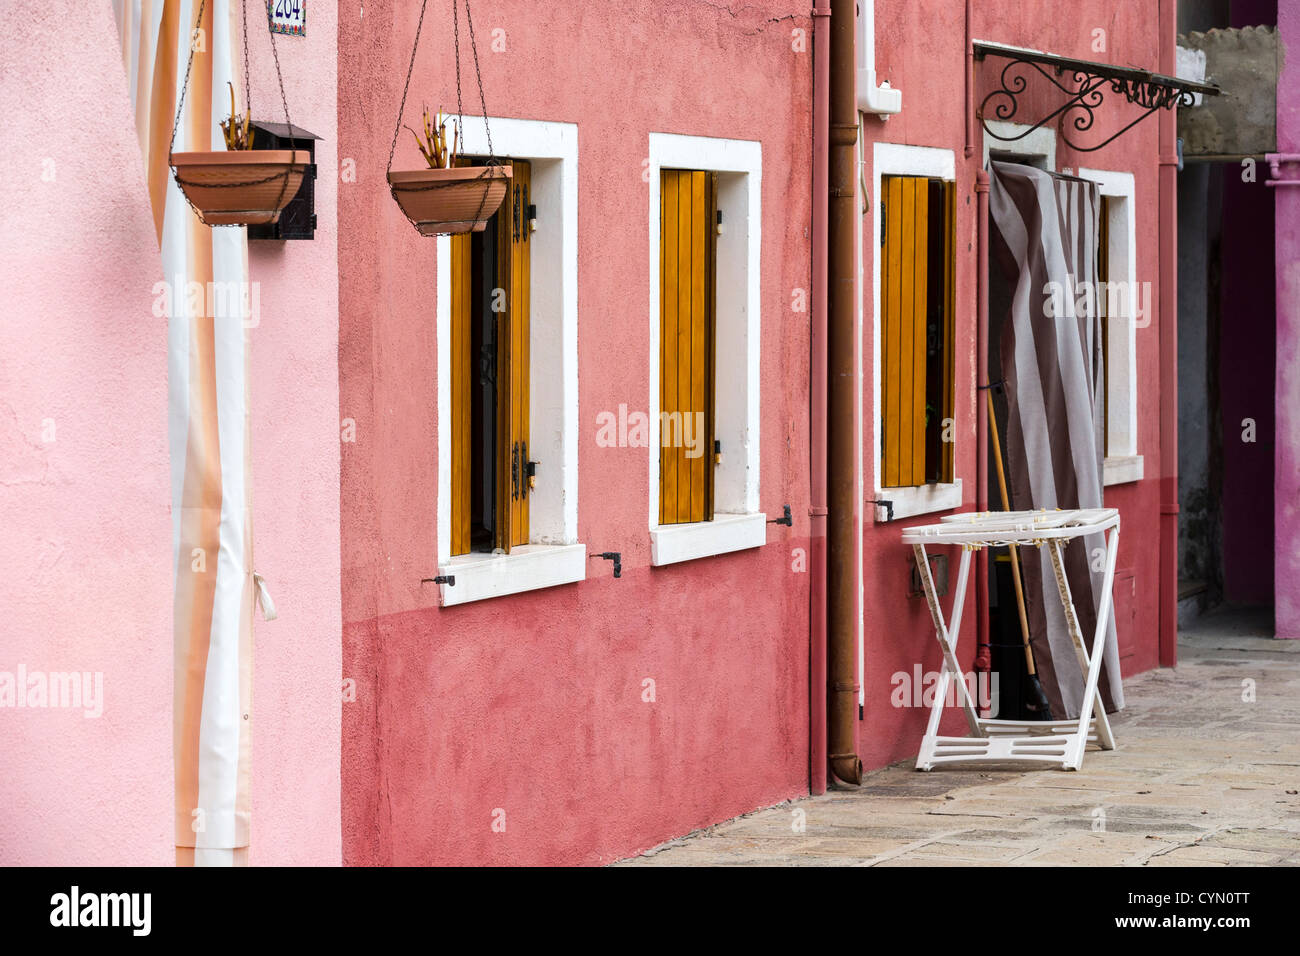 A house in Burano in the typical style with walls painted varying shades of pink, and a clothes-horse just outside the door Stock Photo